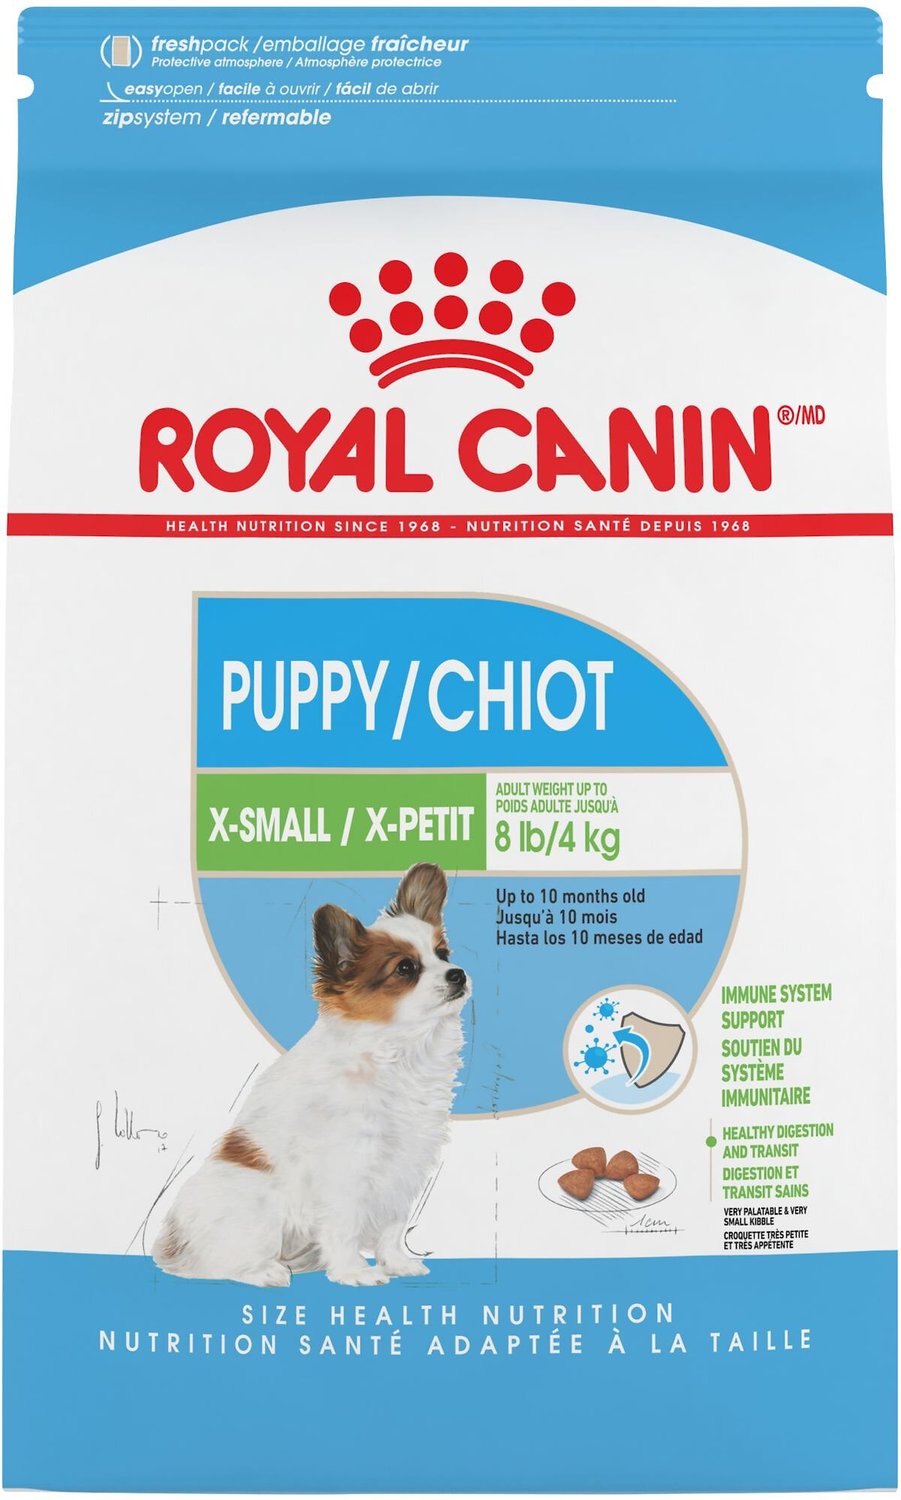 dry dog food for small dogs